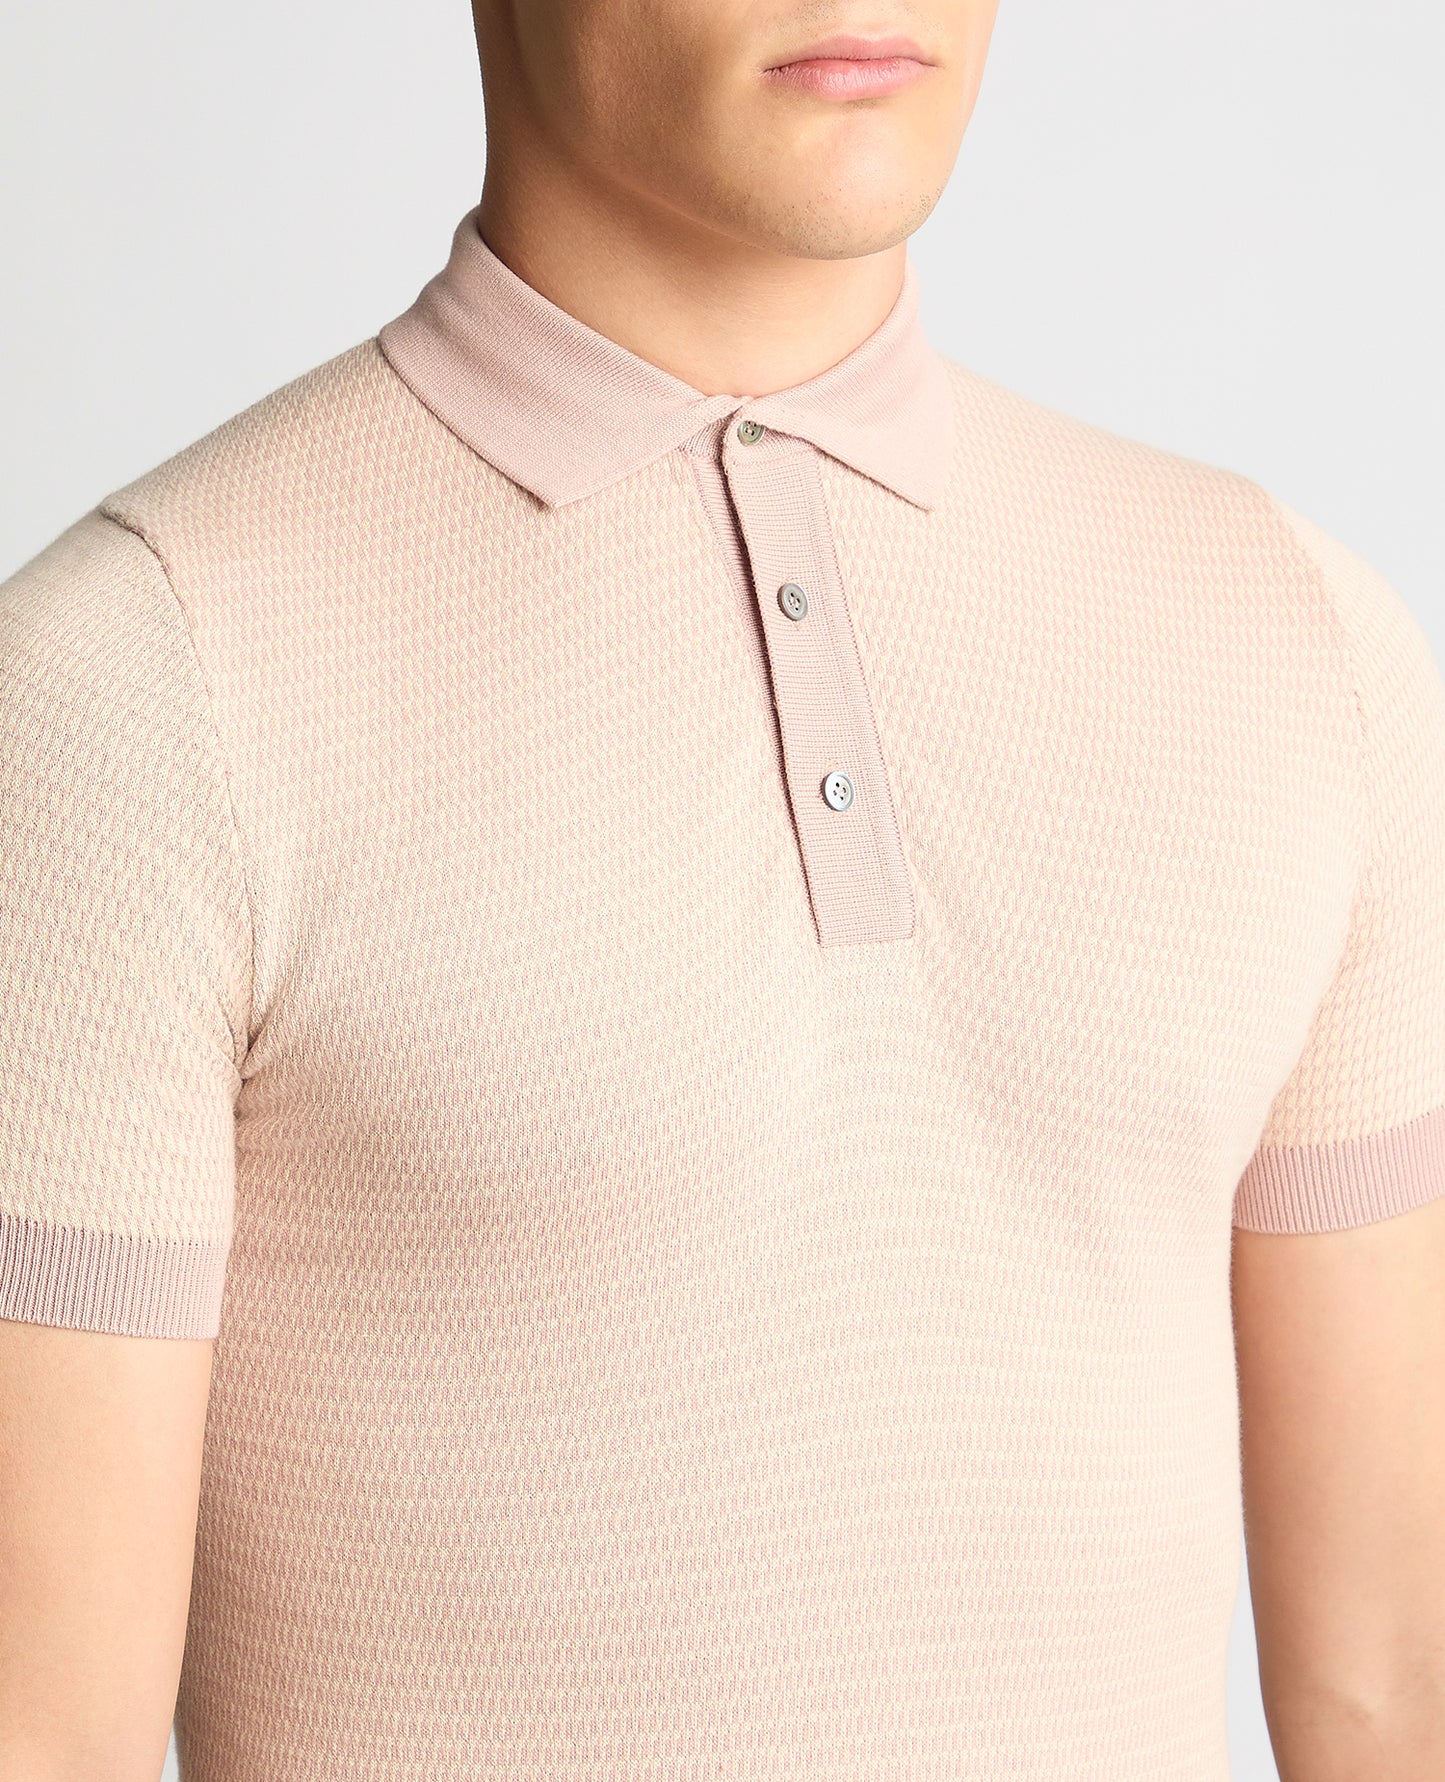 Remus Uomo Short Sleeve Knitted Polo Shirt - Pink